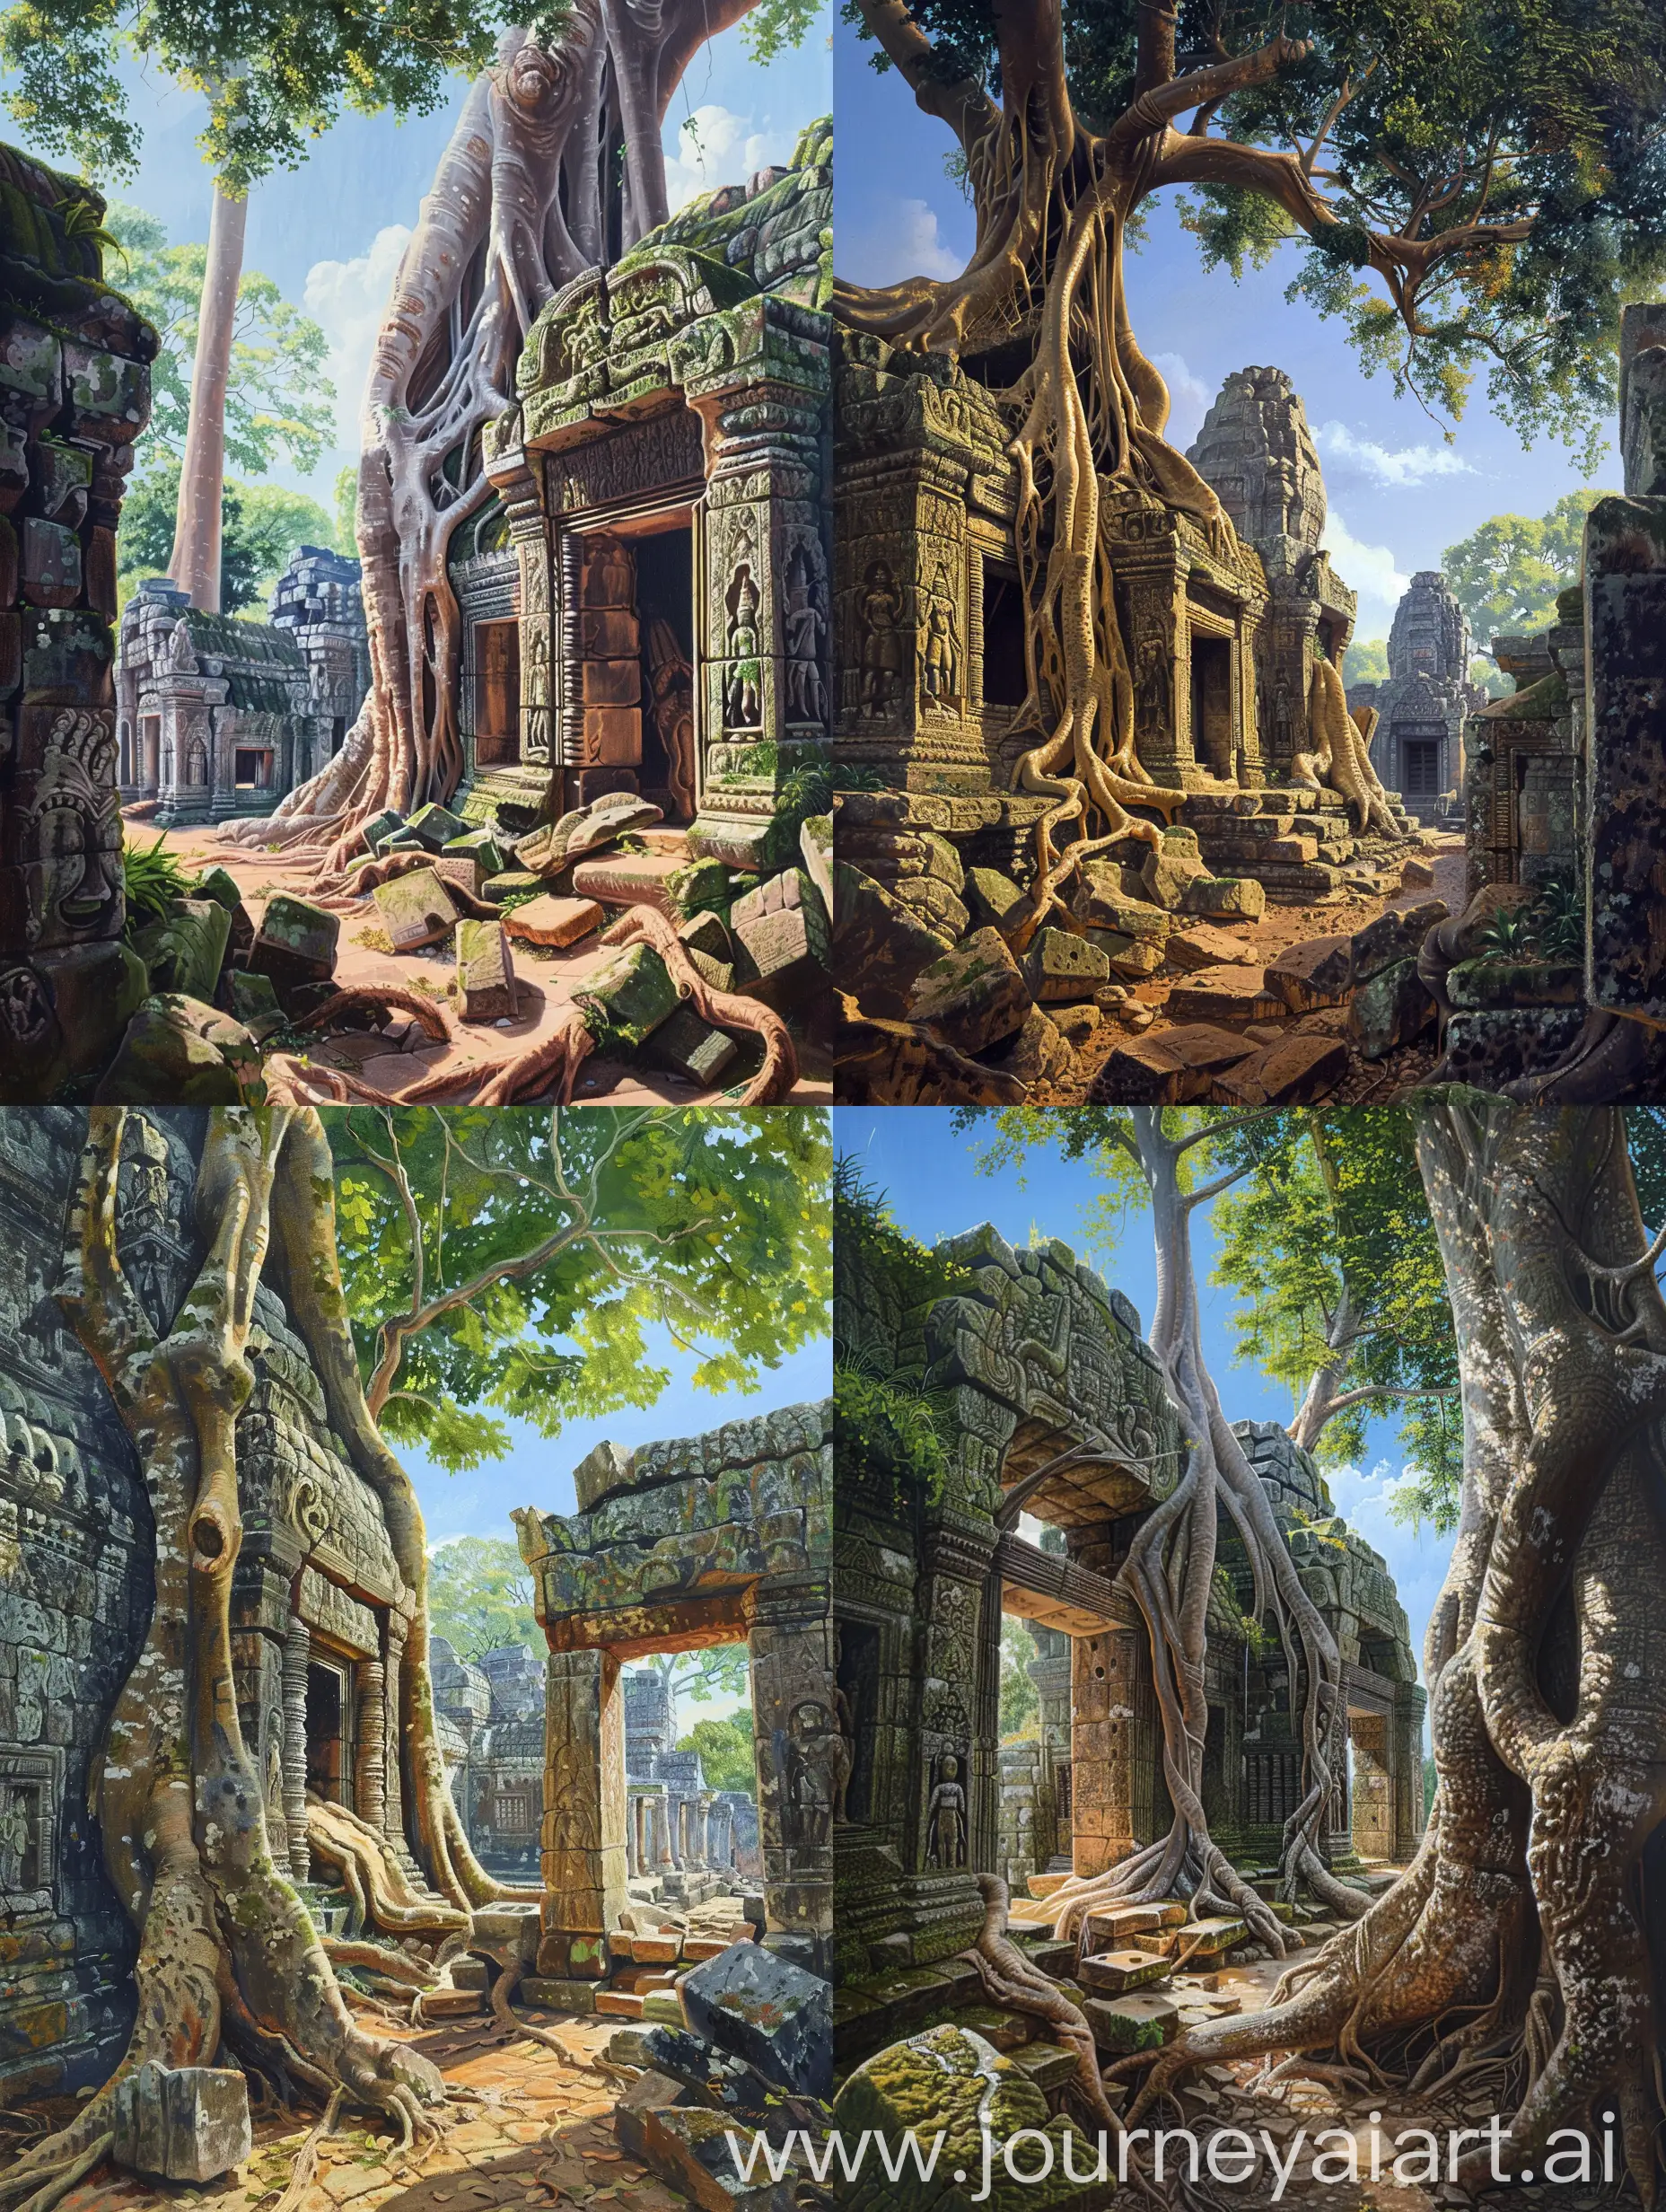 Surrealism painting, ancient temple complex that has been overtaken by the roots of a large tree. The tree's thick trunk and sprawling roots have grown over and through the stone structures, which are made of weathered stone blocks with intricate carvings. This scene is set in a tropical environment, with a clear blue sky visible through the canopy and sunlight filtering through the leaves.cinematic,vibrant